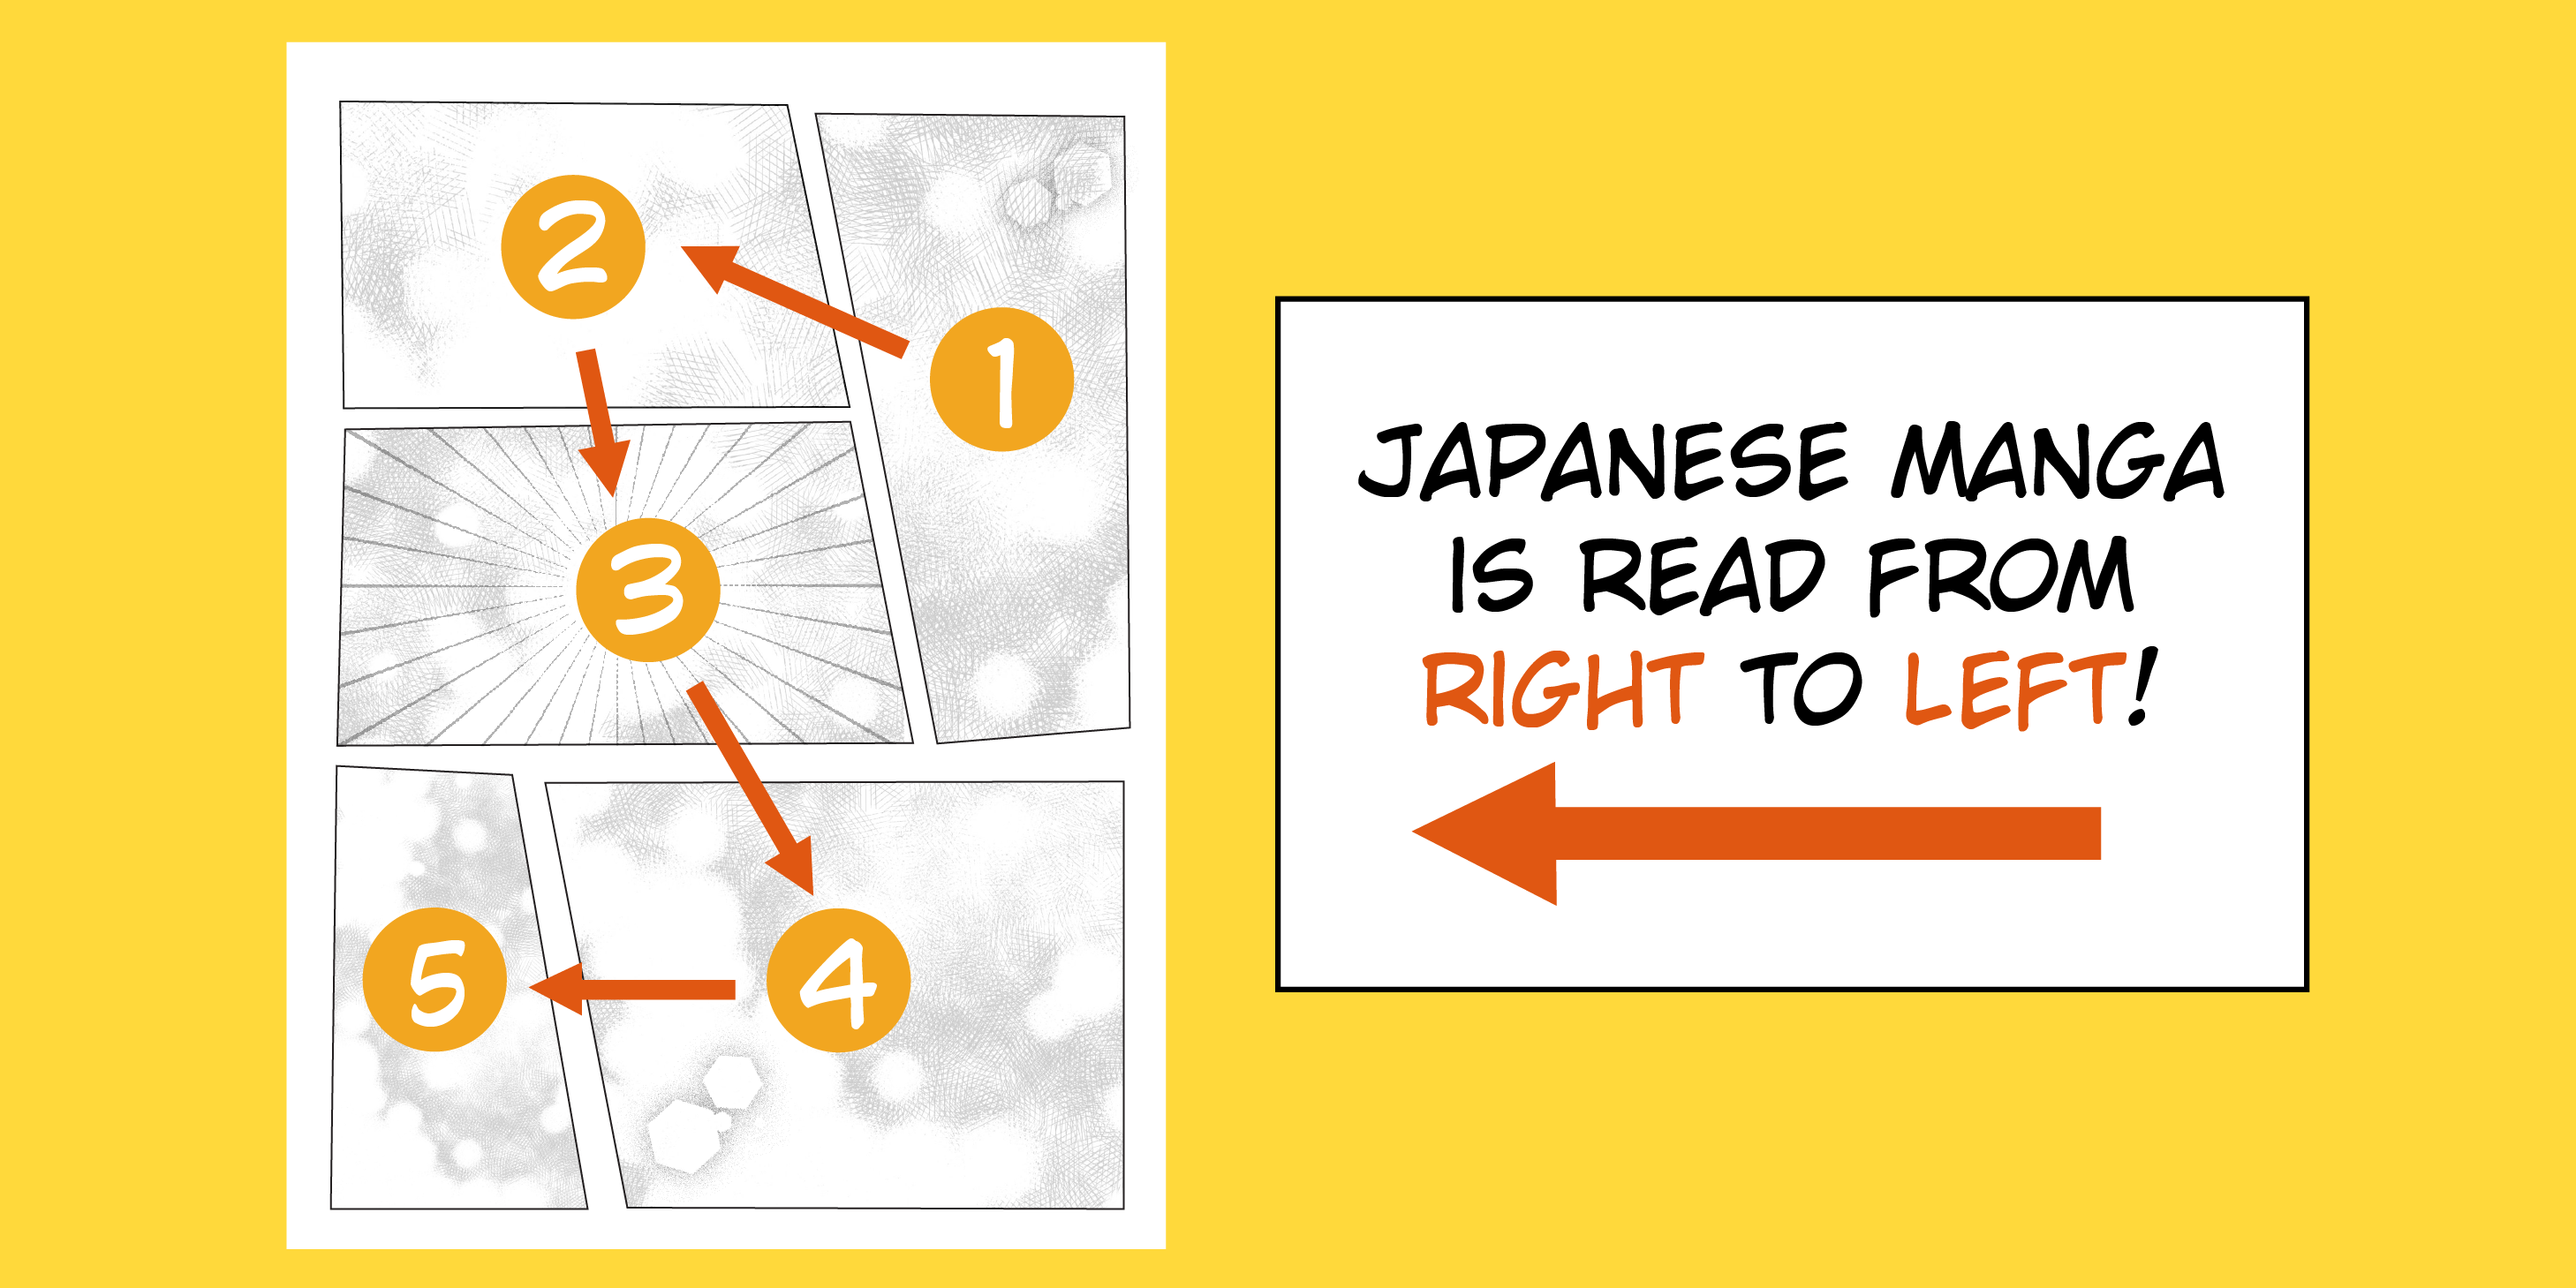 Japanese manga is read from right to left!